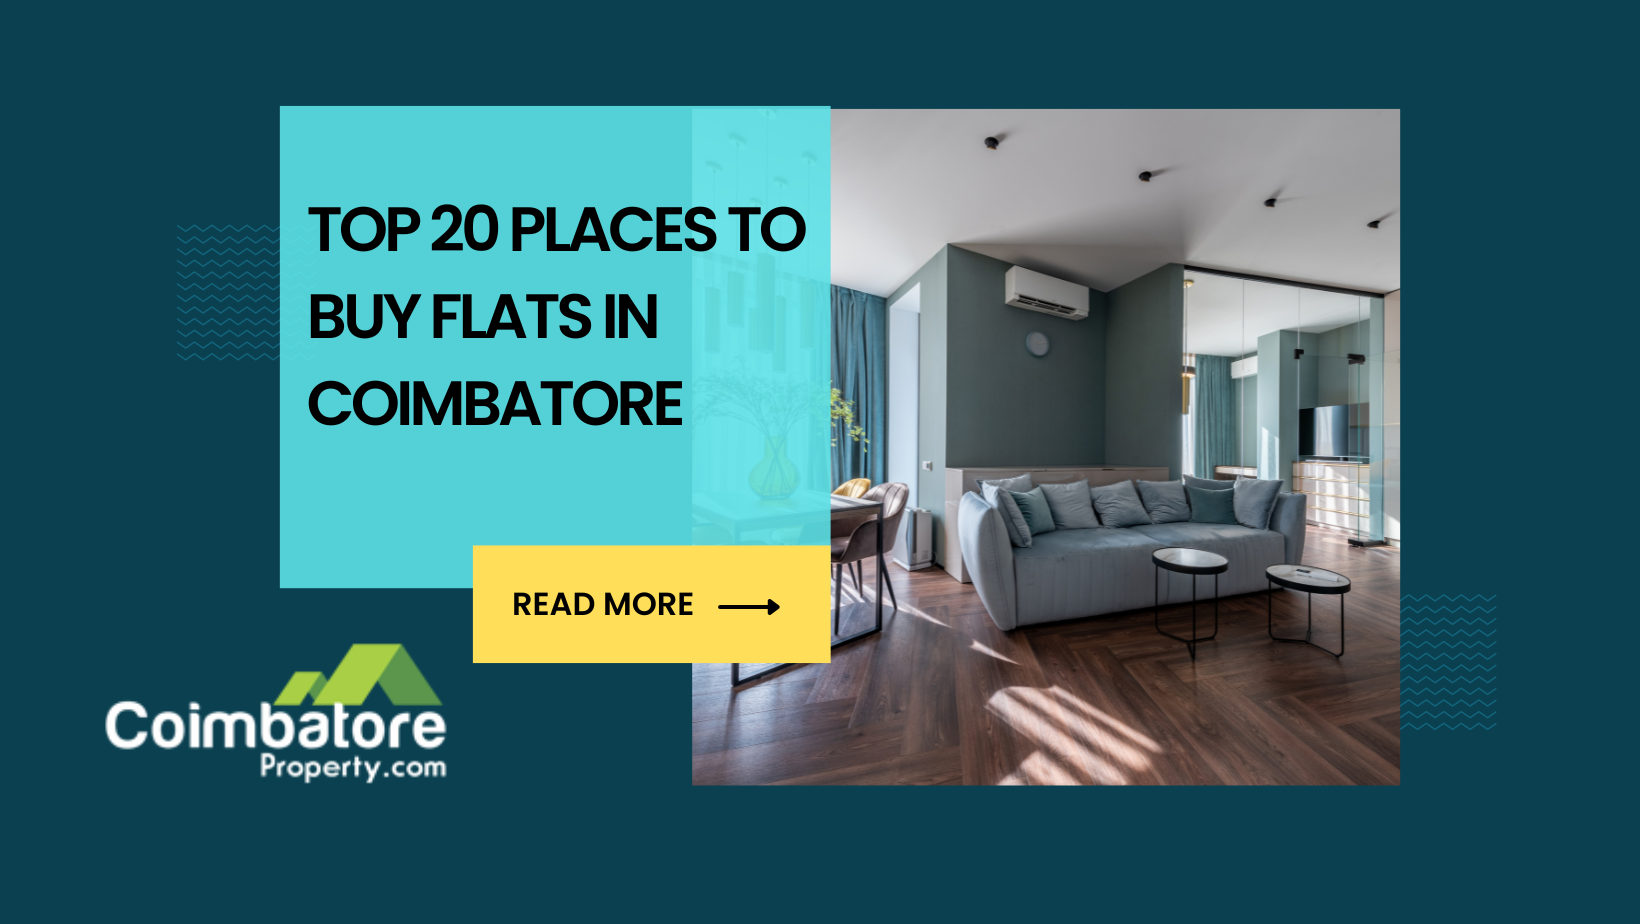 Top 20 Places to Buy Flats in Coimbatore